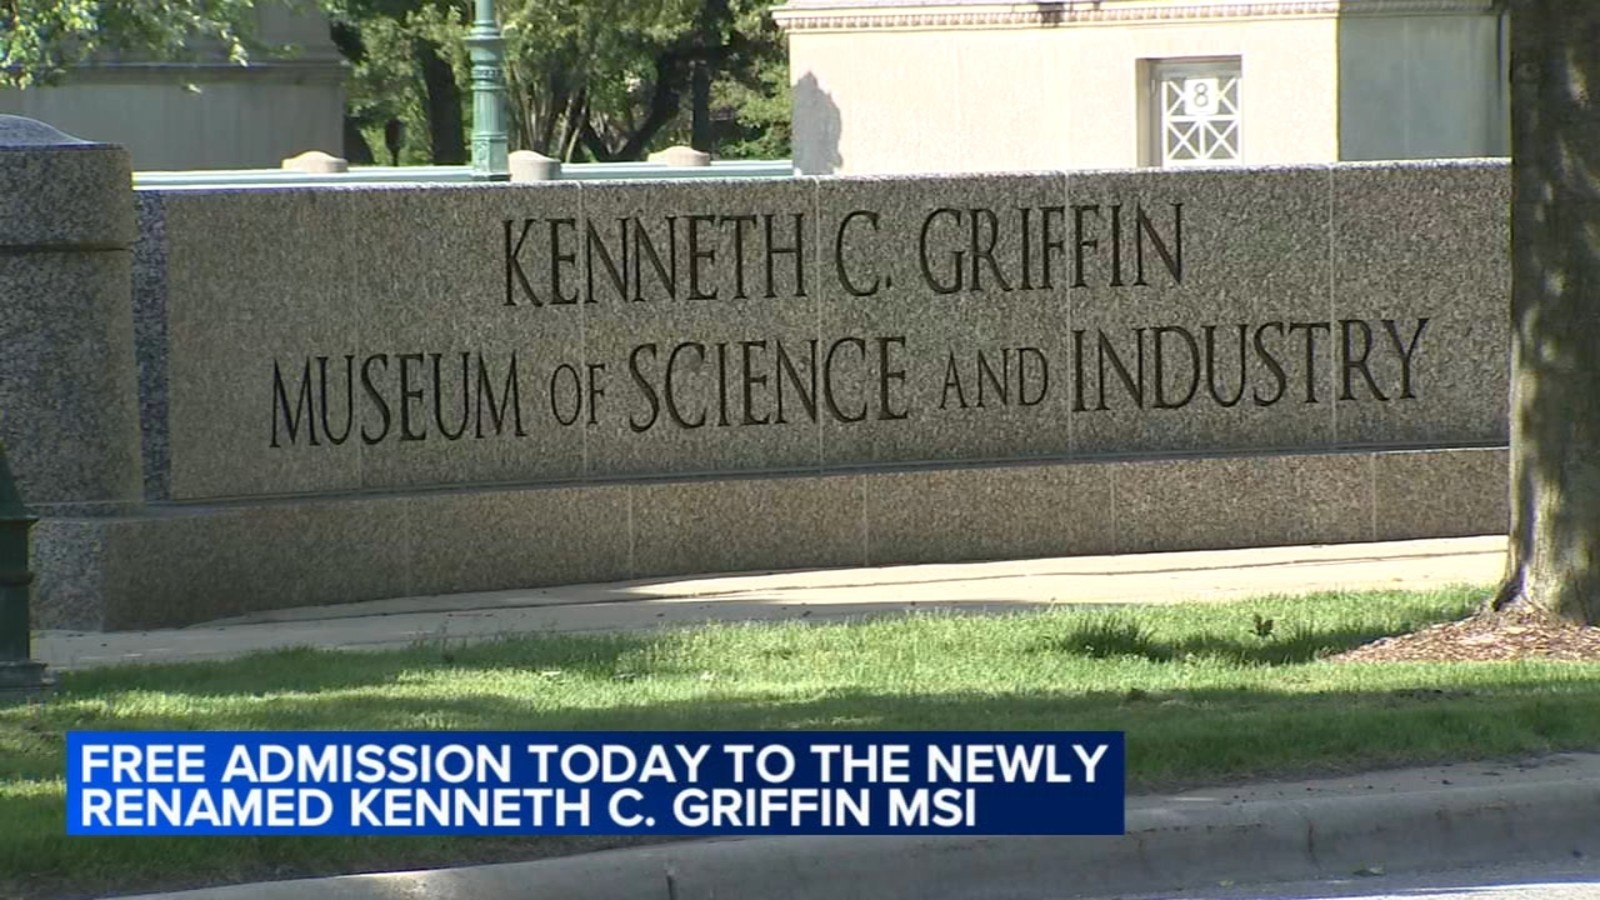 New signs put up for renamed Kenneth C. Griffin Museum of Science and Industry